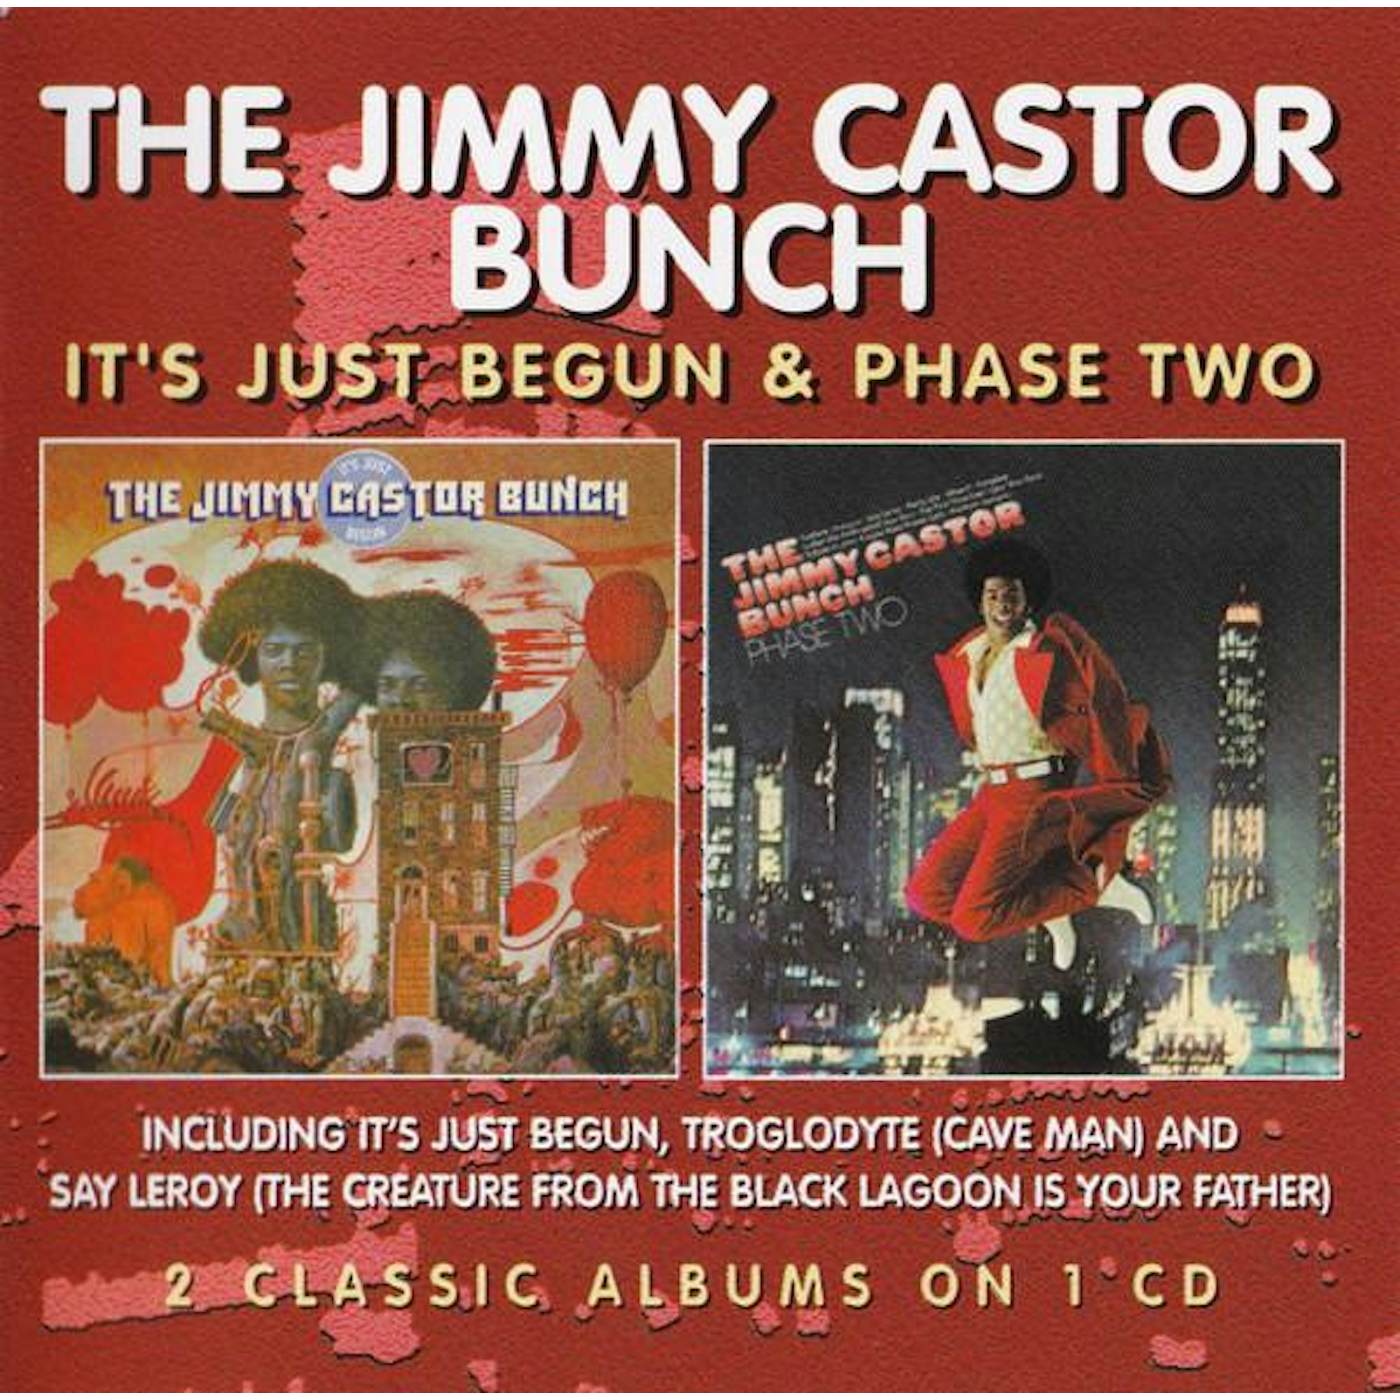 The Jimmy Castor Bunch IT'S JUST BEGUN / PHASE TWO CD